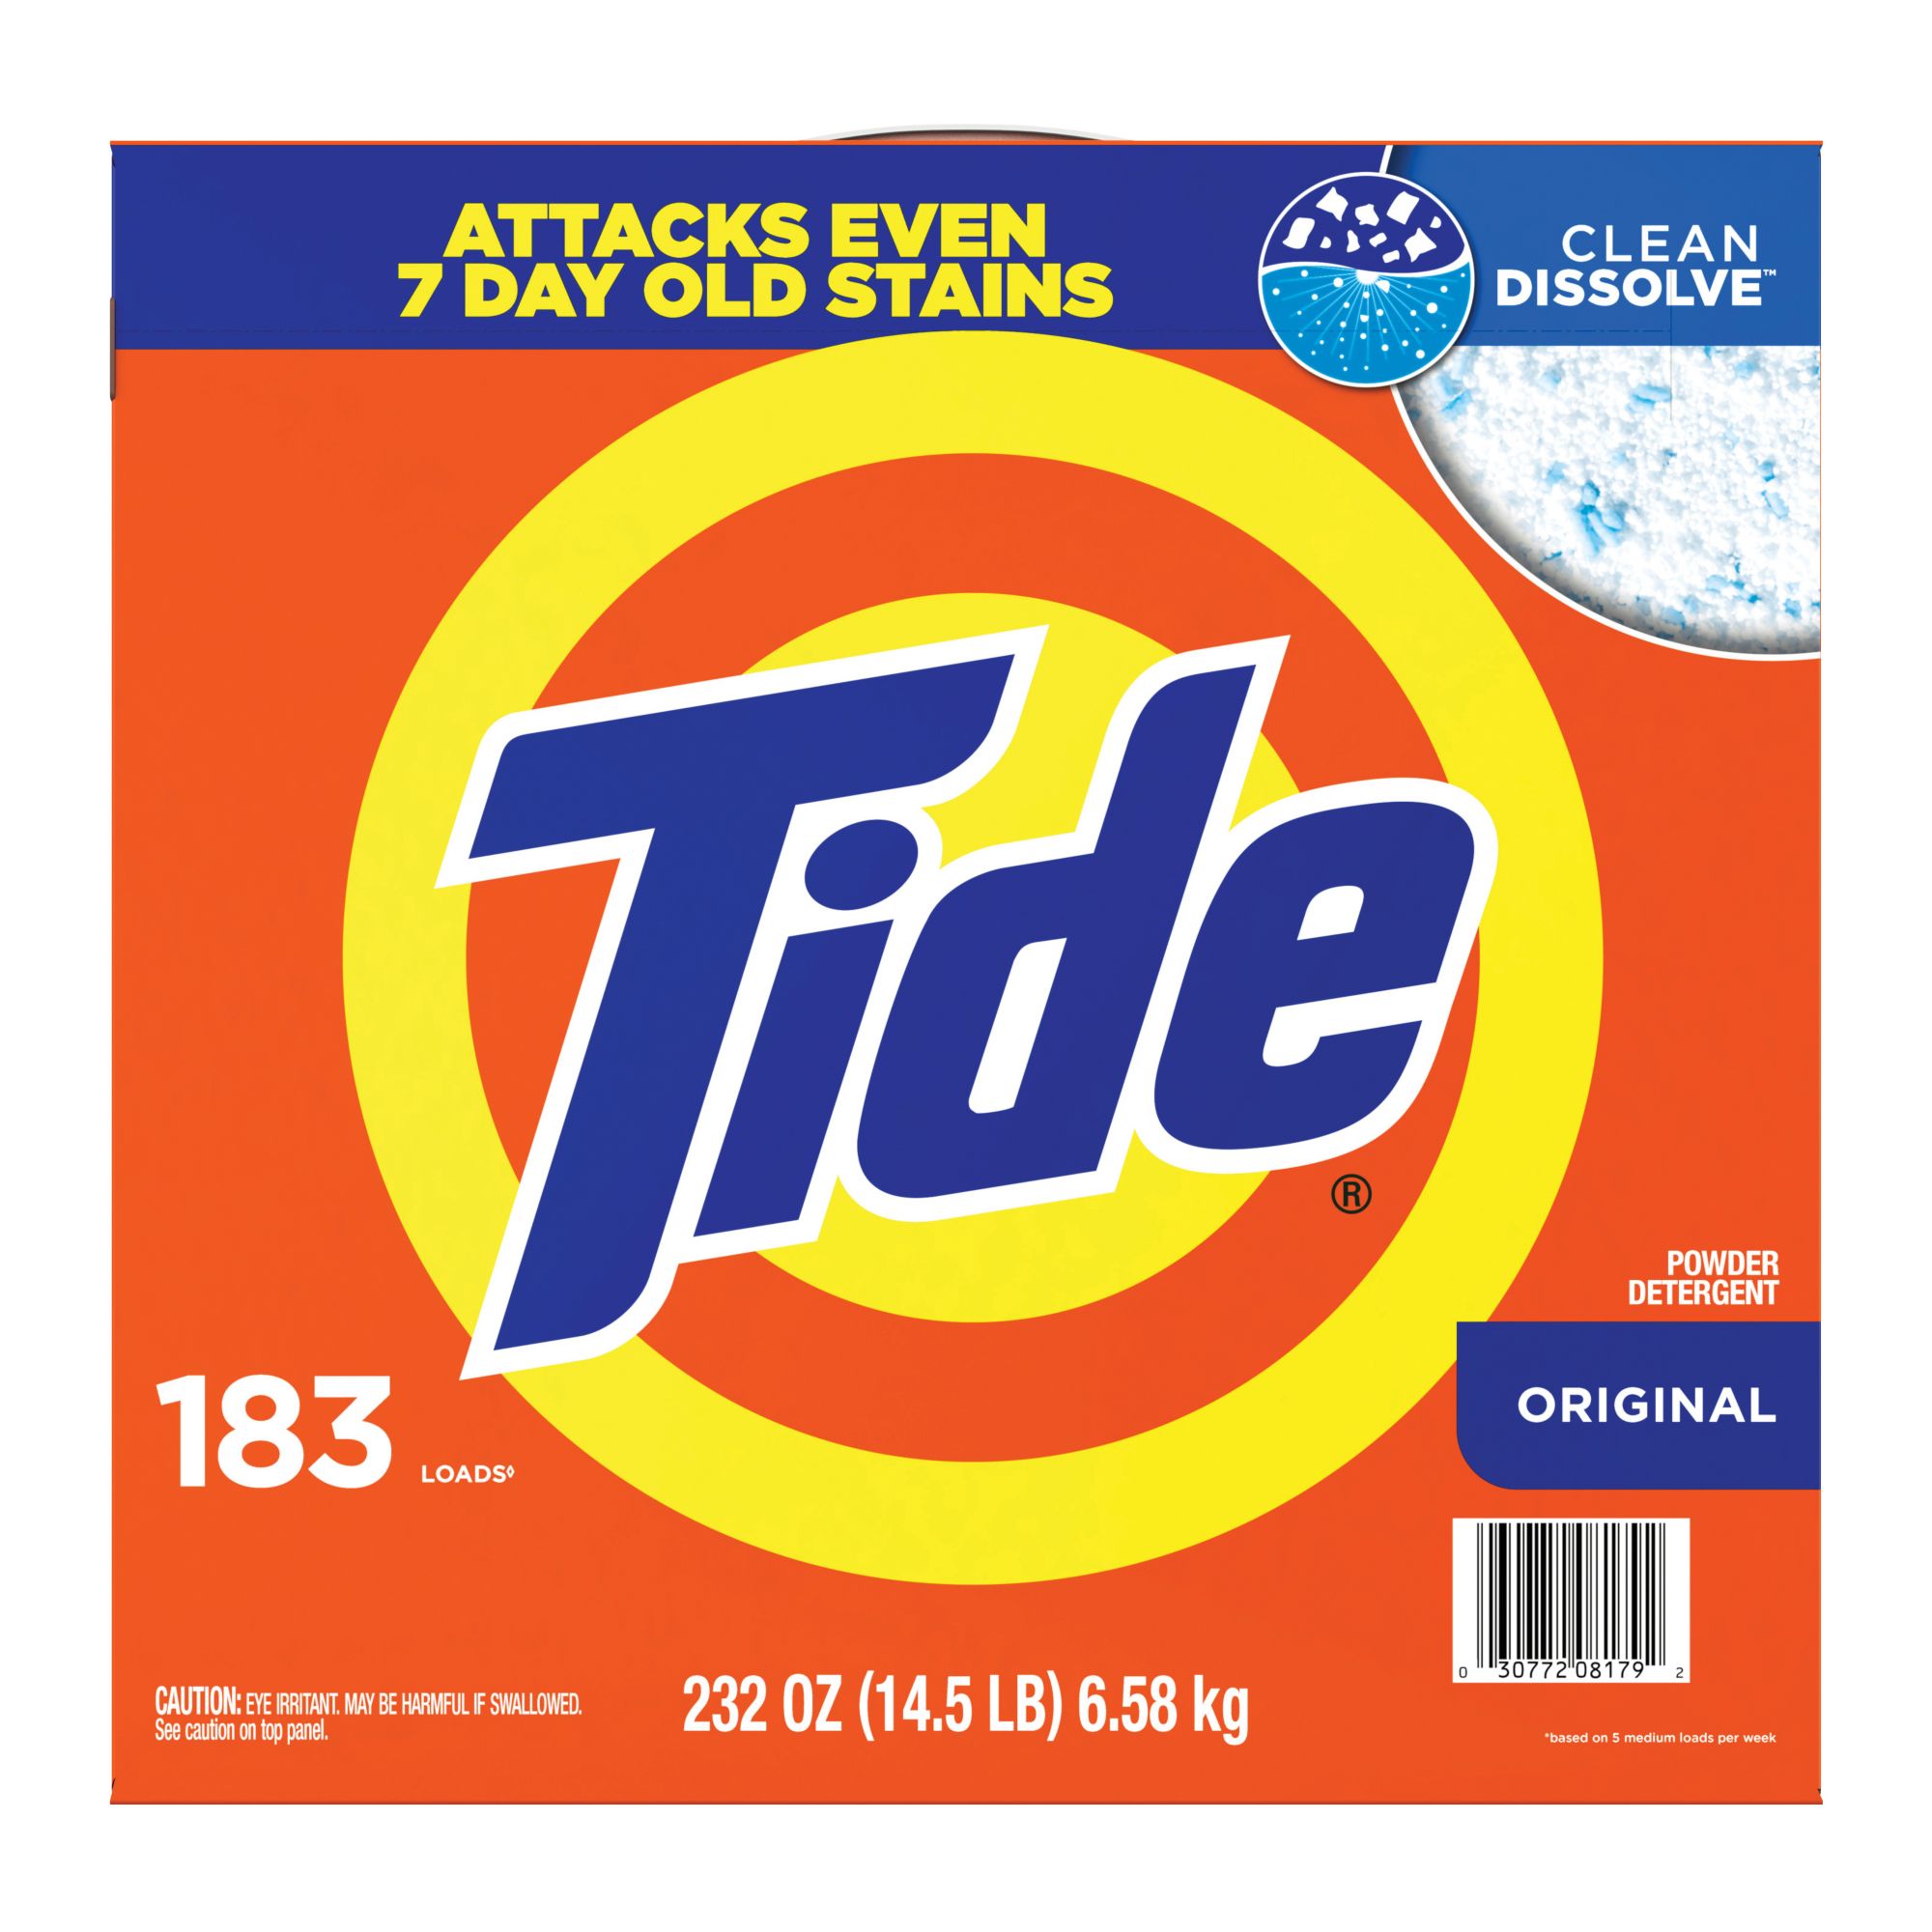 Tide Pods with Downy HE Laundry Detergent Pods, April Fresh, 104-count